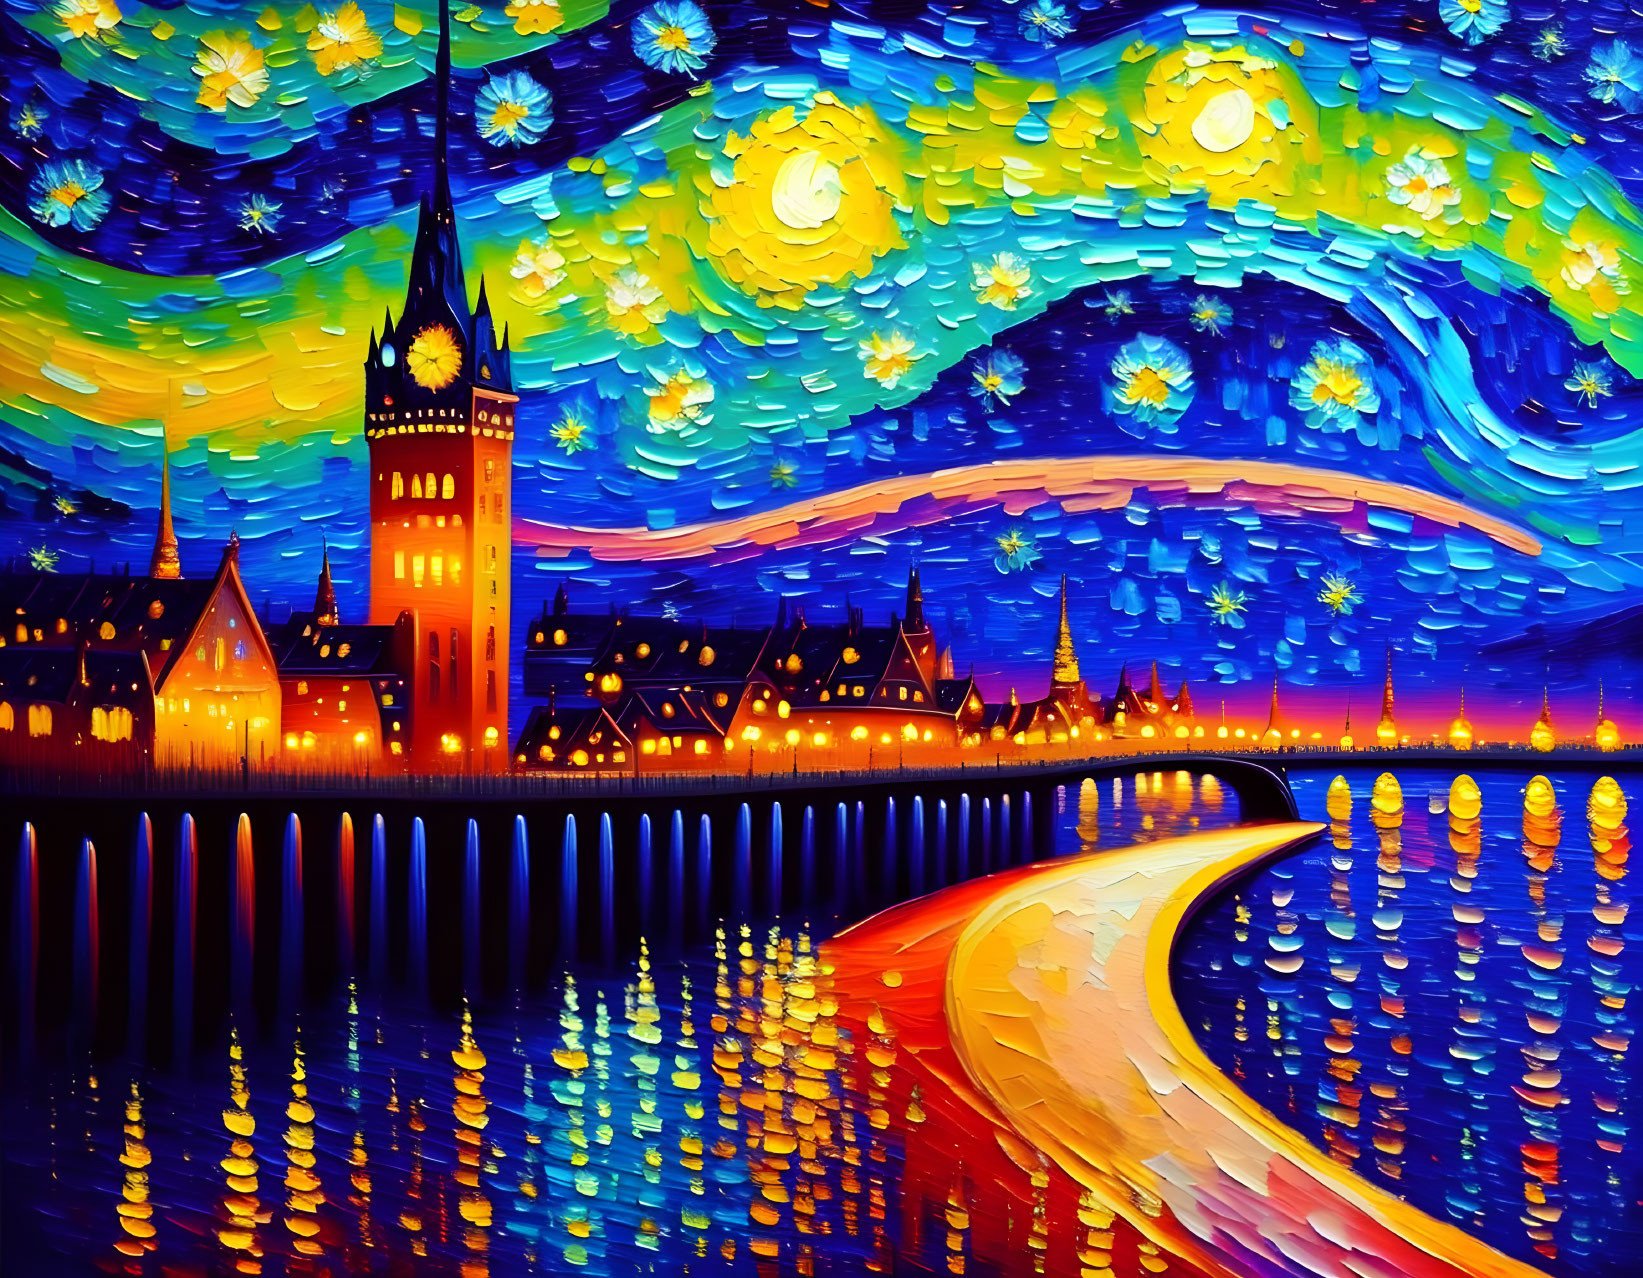 Vibrant Van Gogh-inspired painting: Starry night over European town.